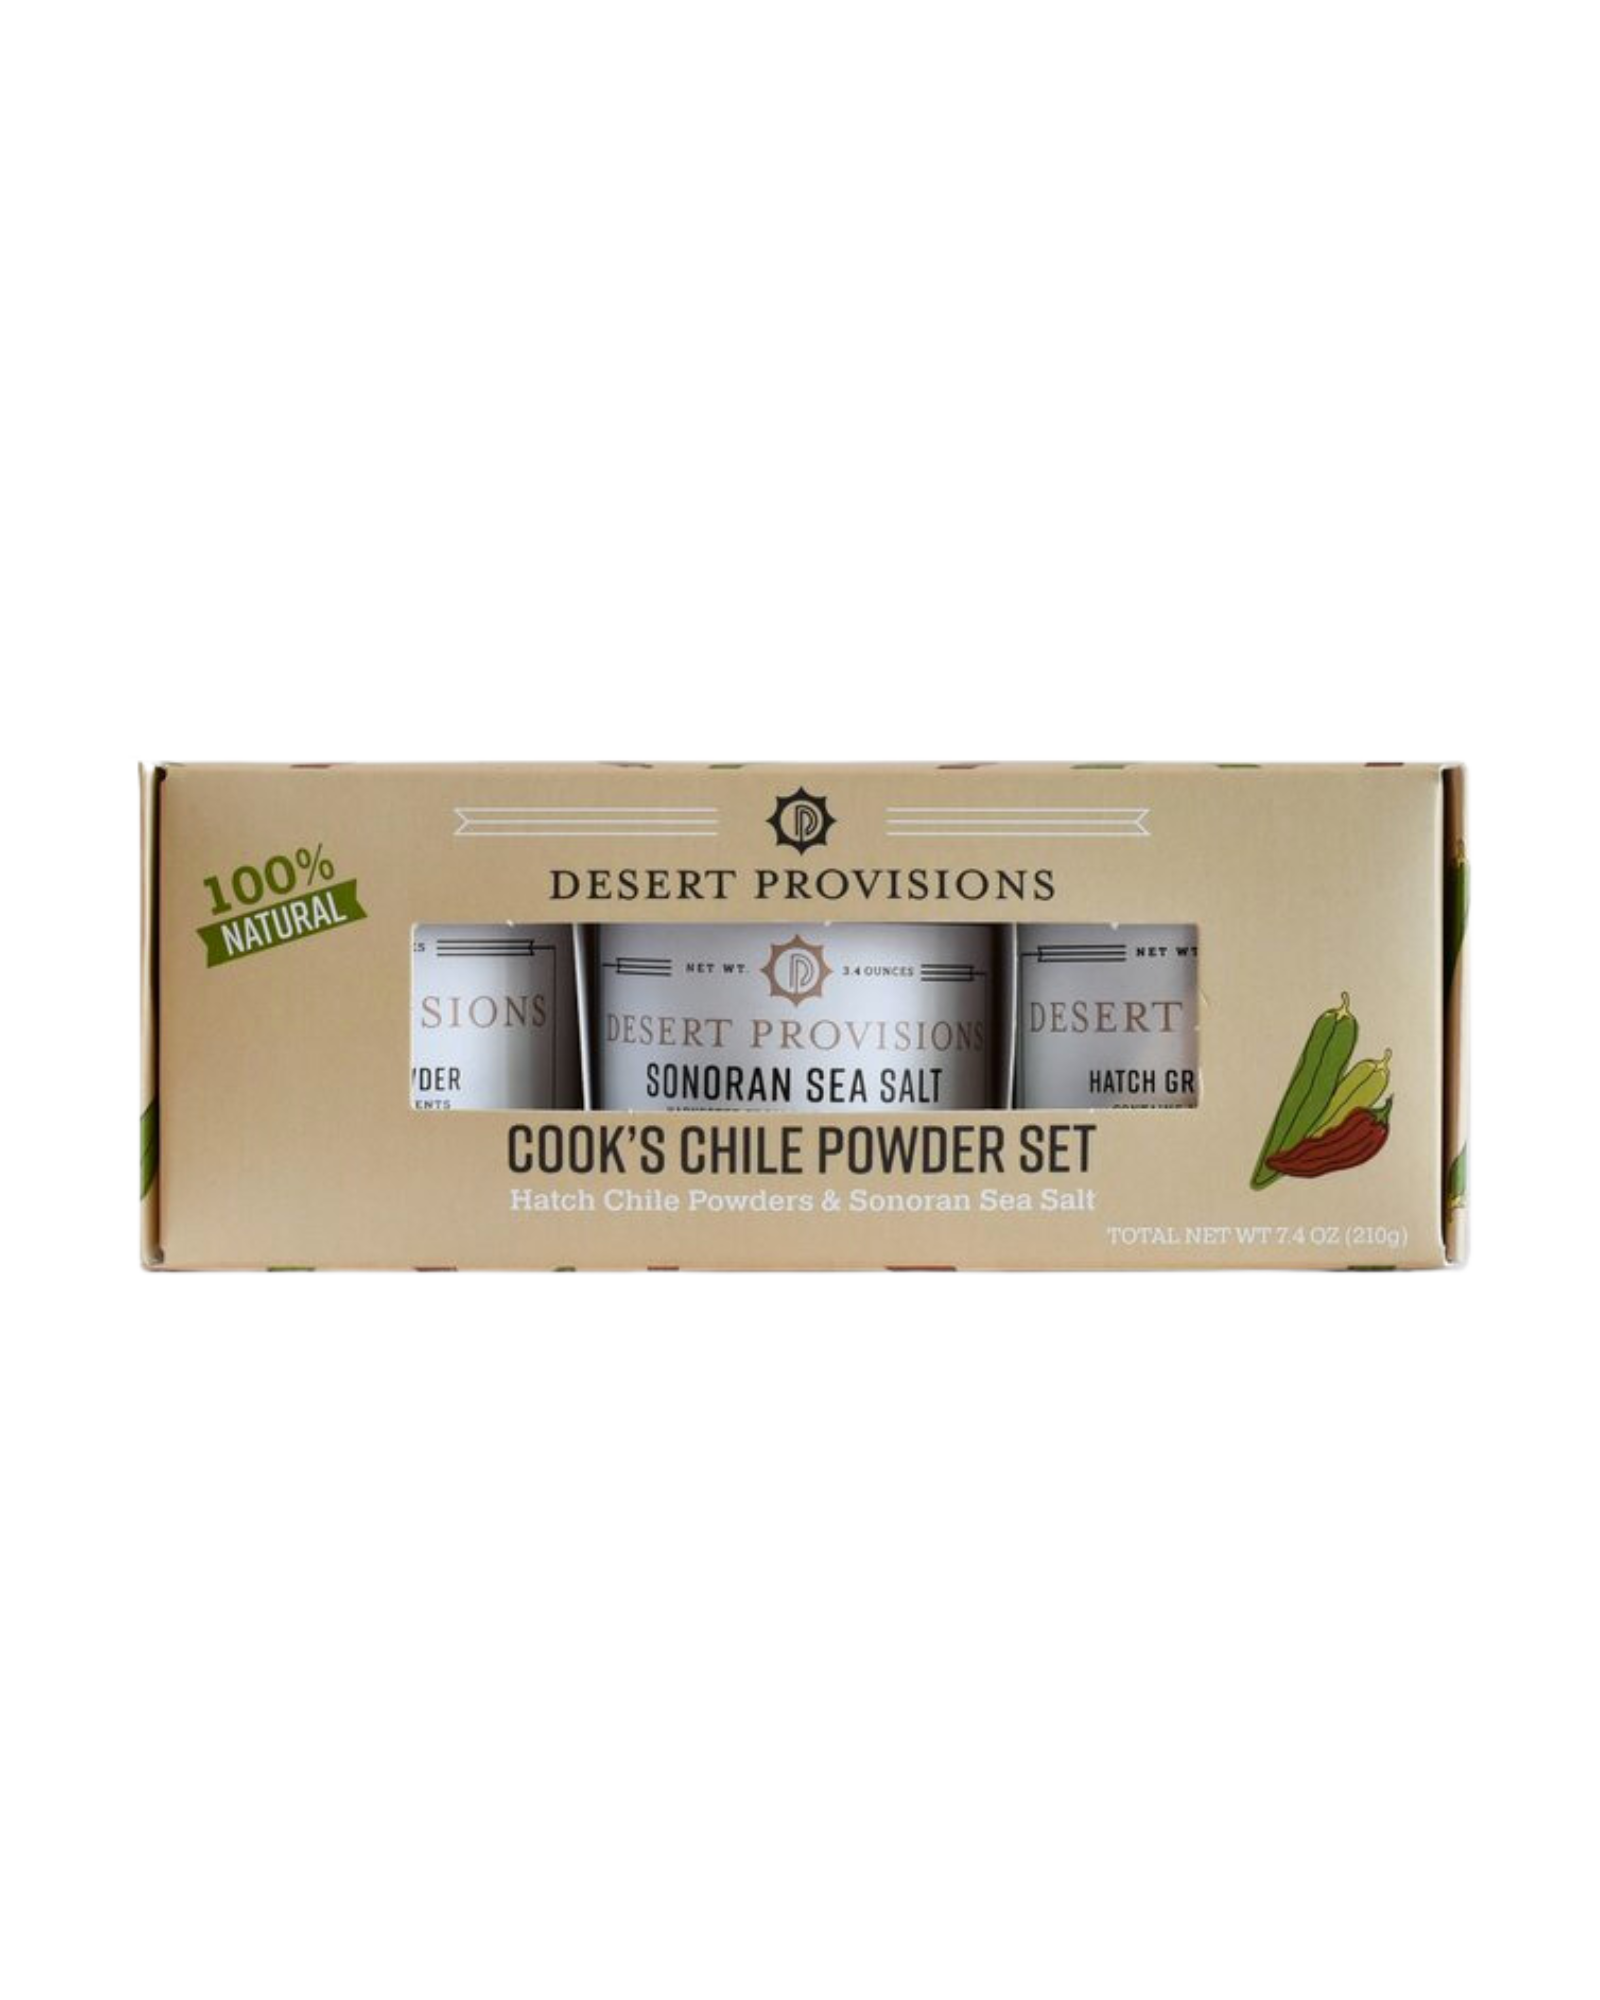 Cook's chile powder set packaging